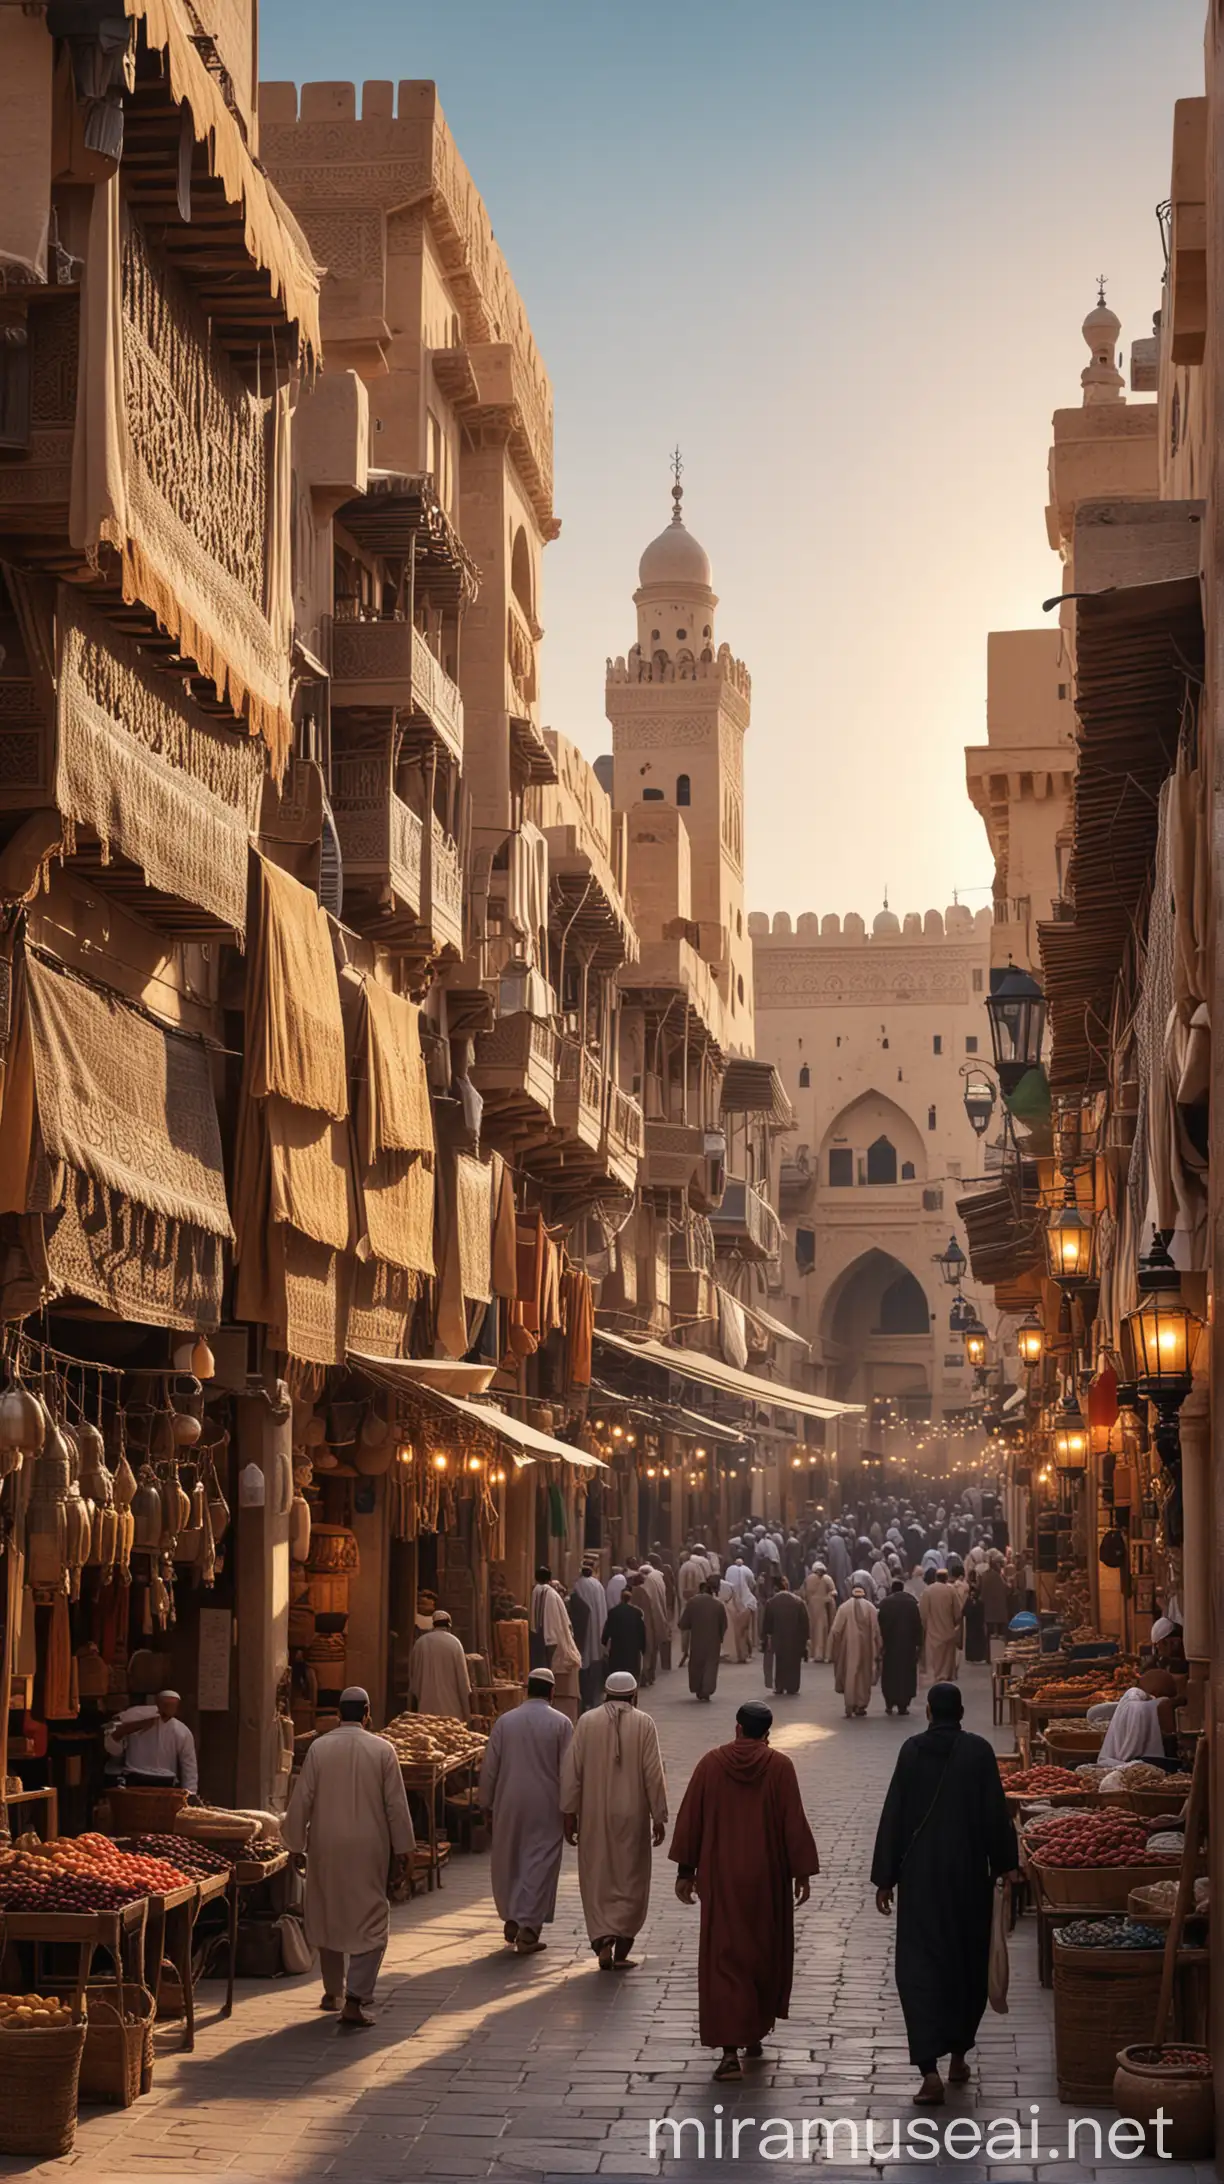 Visualize a bustling marketplace in the heart of ancient Medina, with merchants and shoppers bustling about amid the sounds of trade and commerce, with islamic way HD and 4K